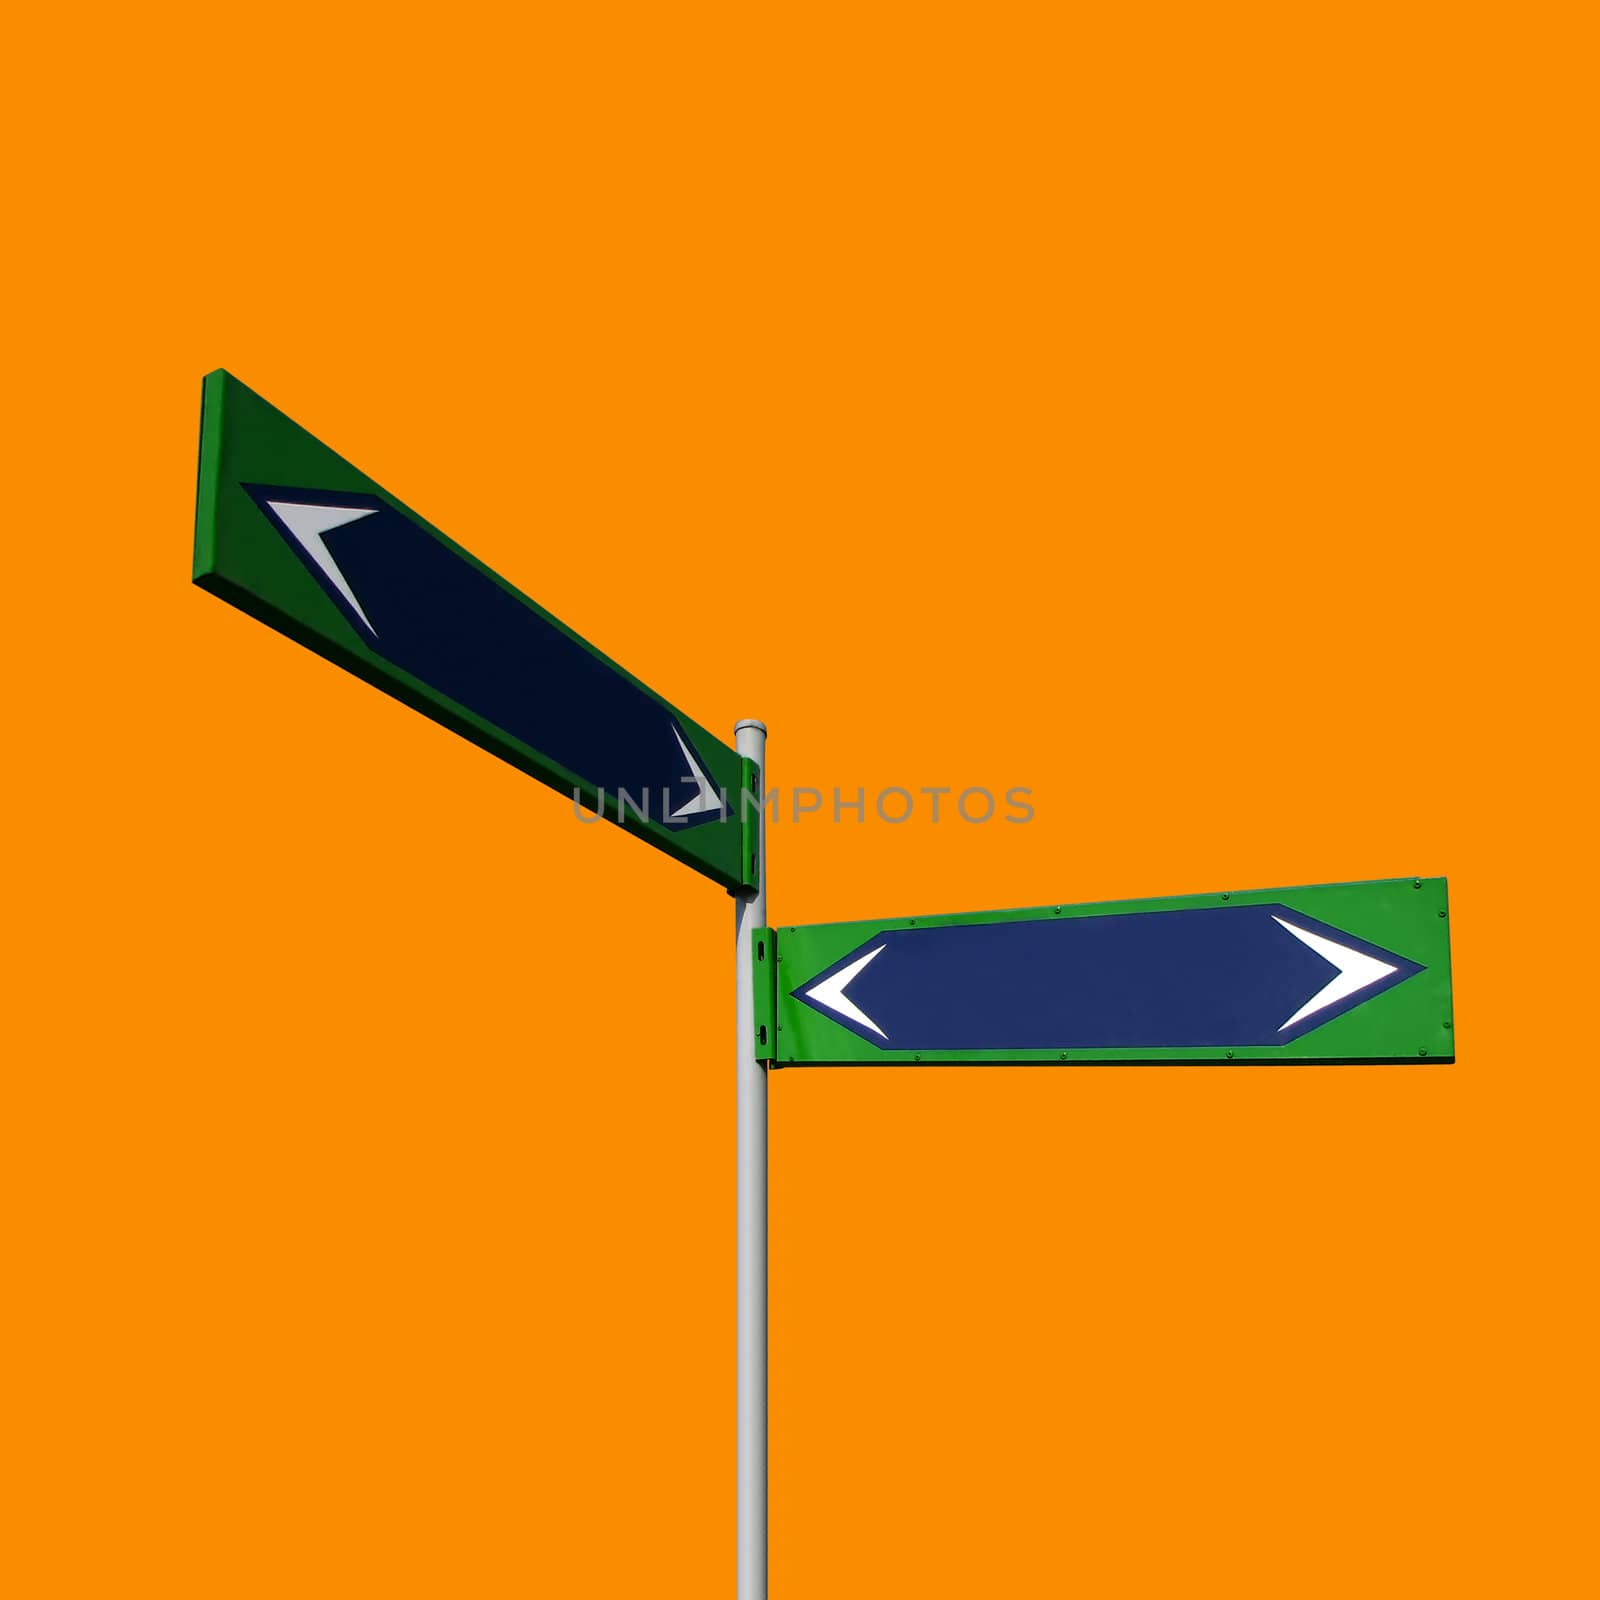 Direction signs on orange background with working path by cristiaciobanu